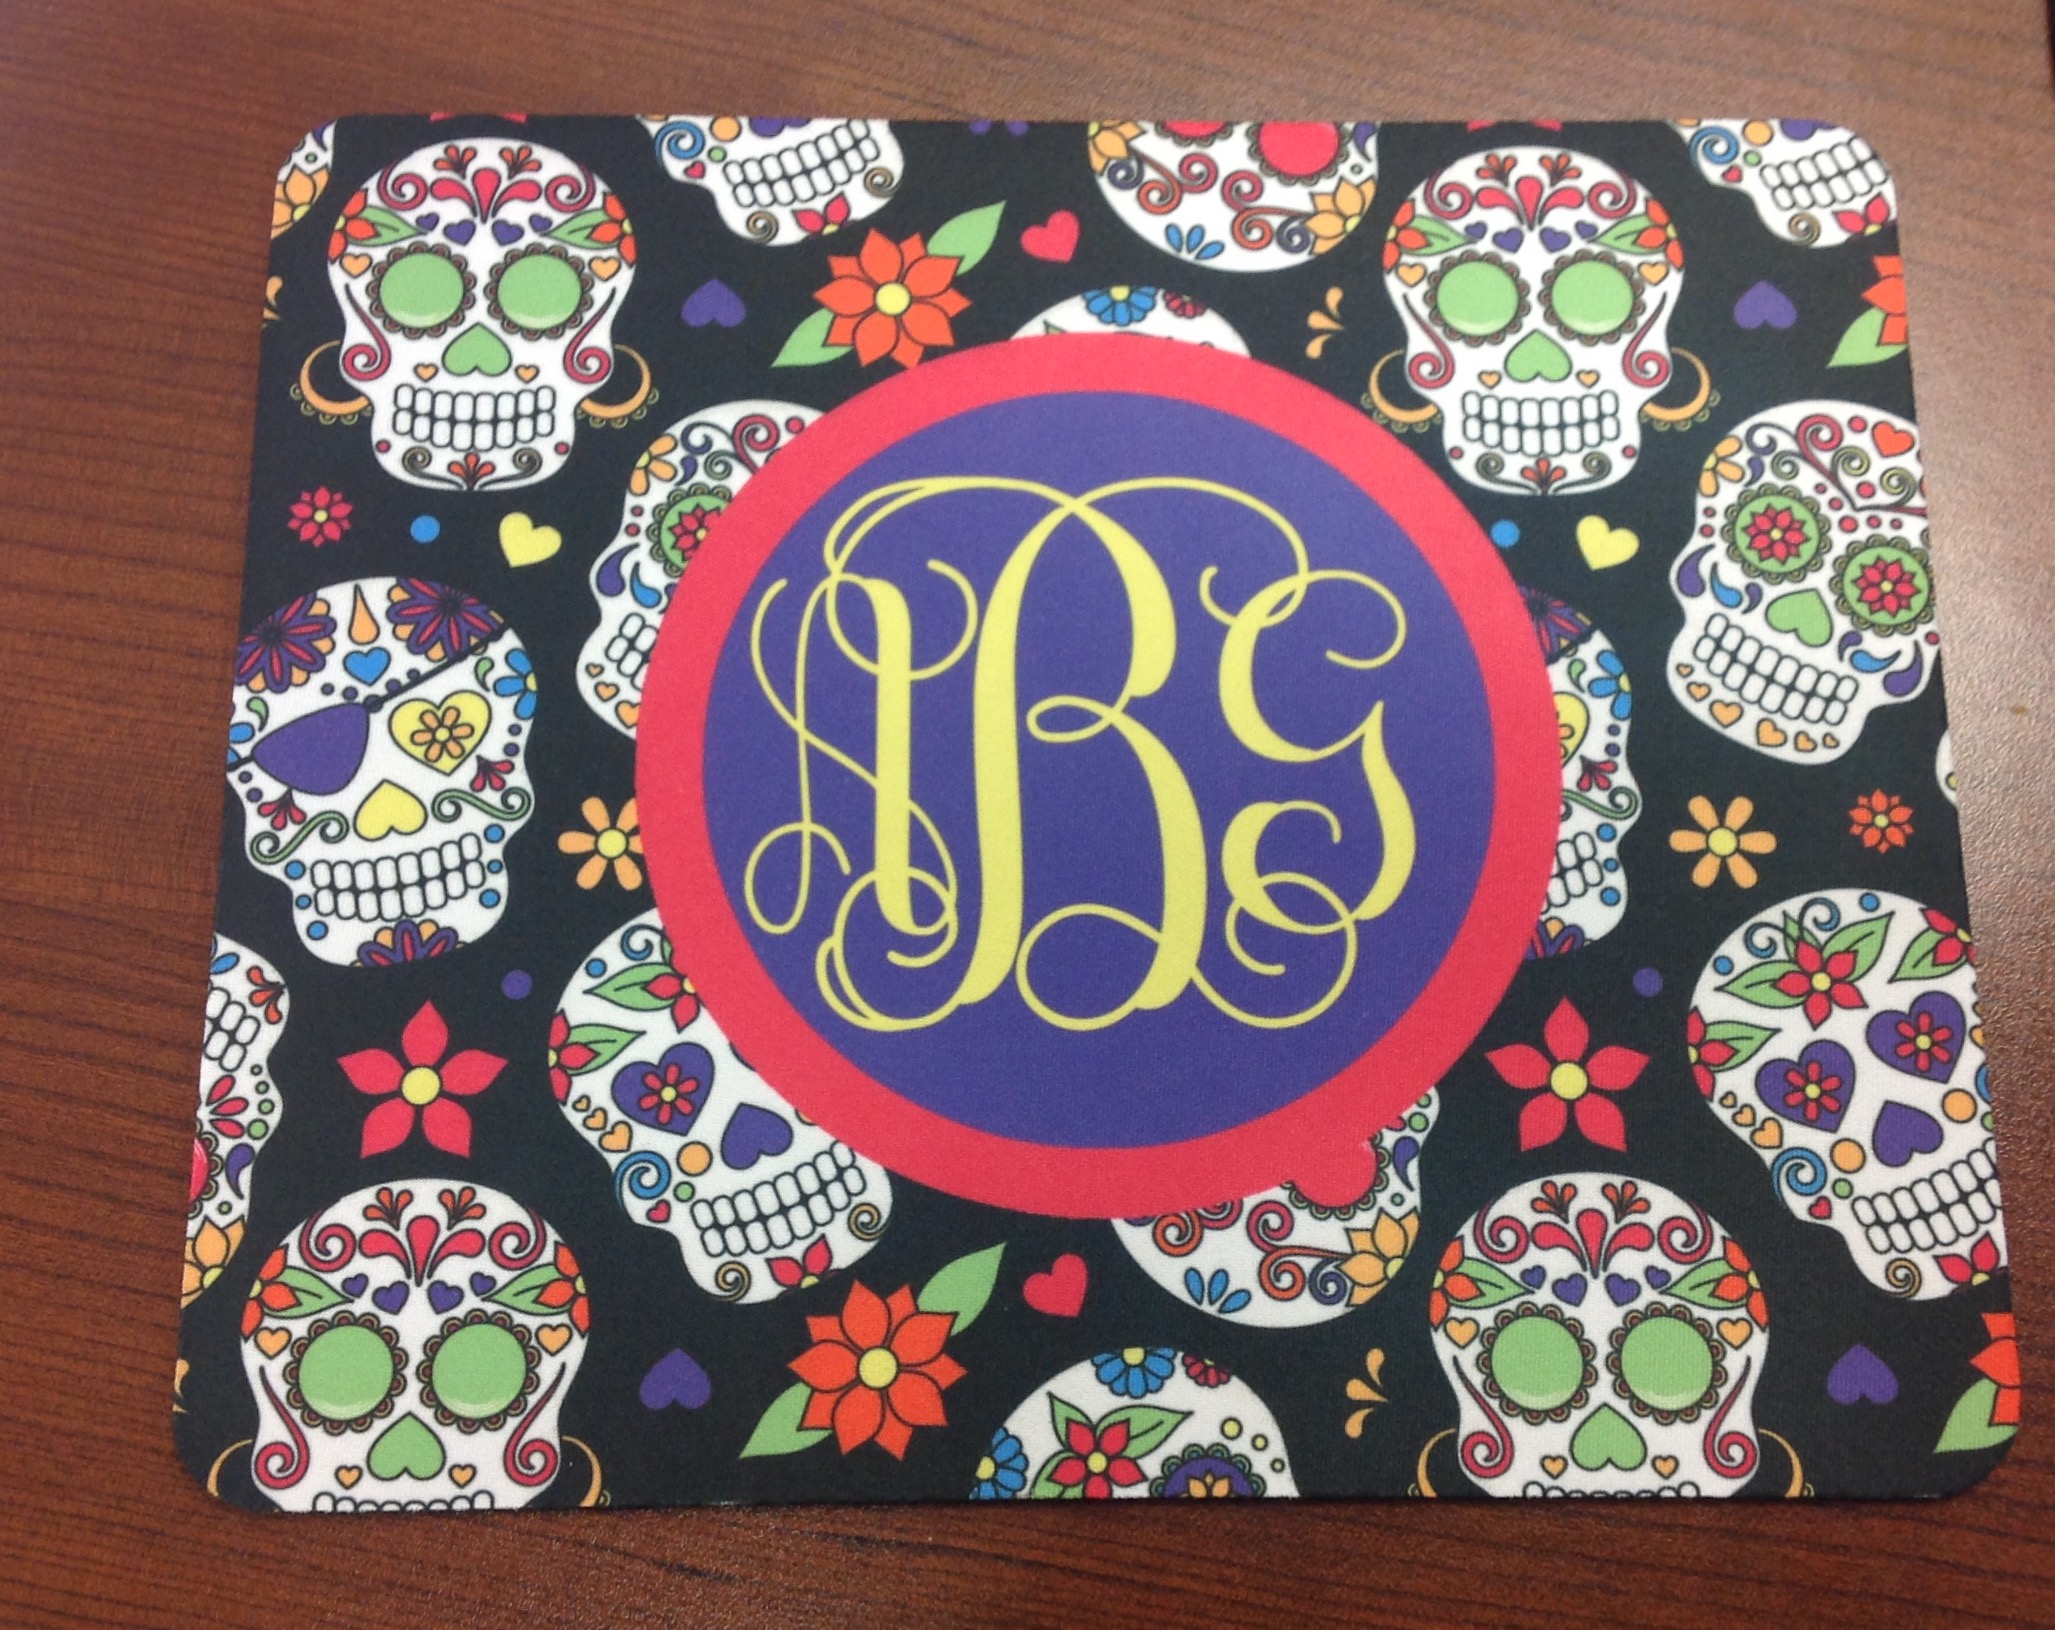 Sugar Skull Mouse Pad made with sublimation printing